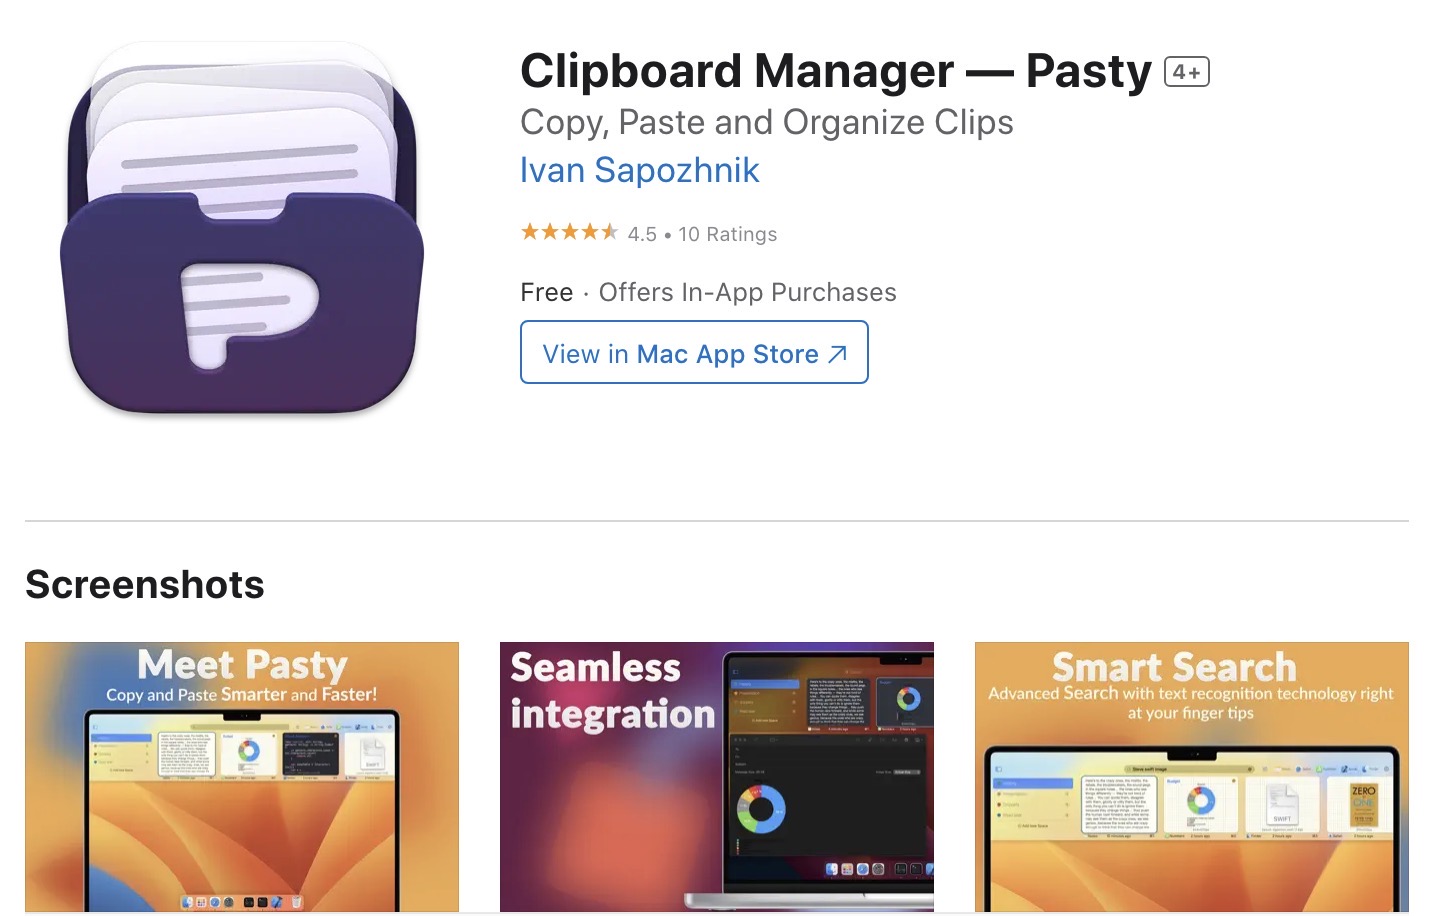 Clipboard Manager — Pasty